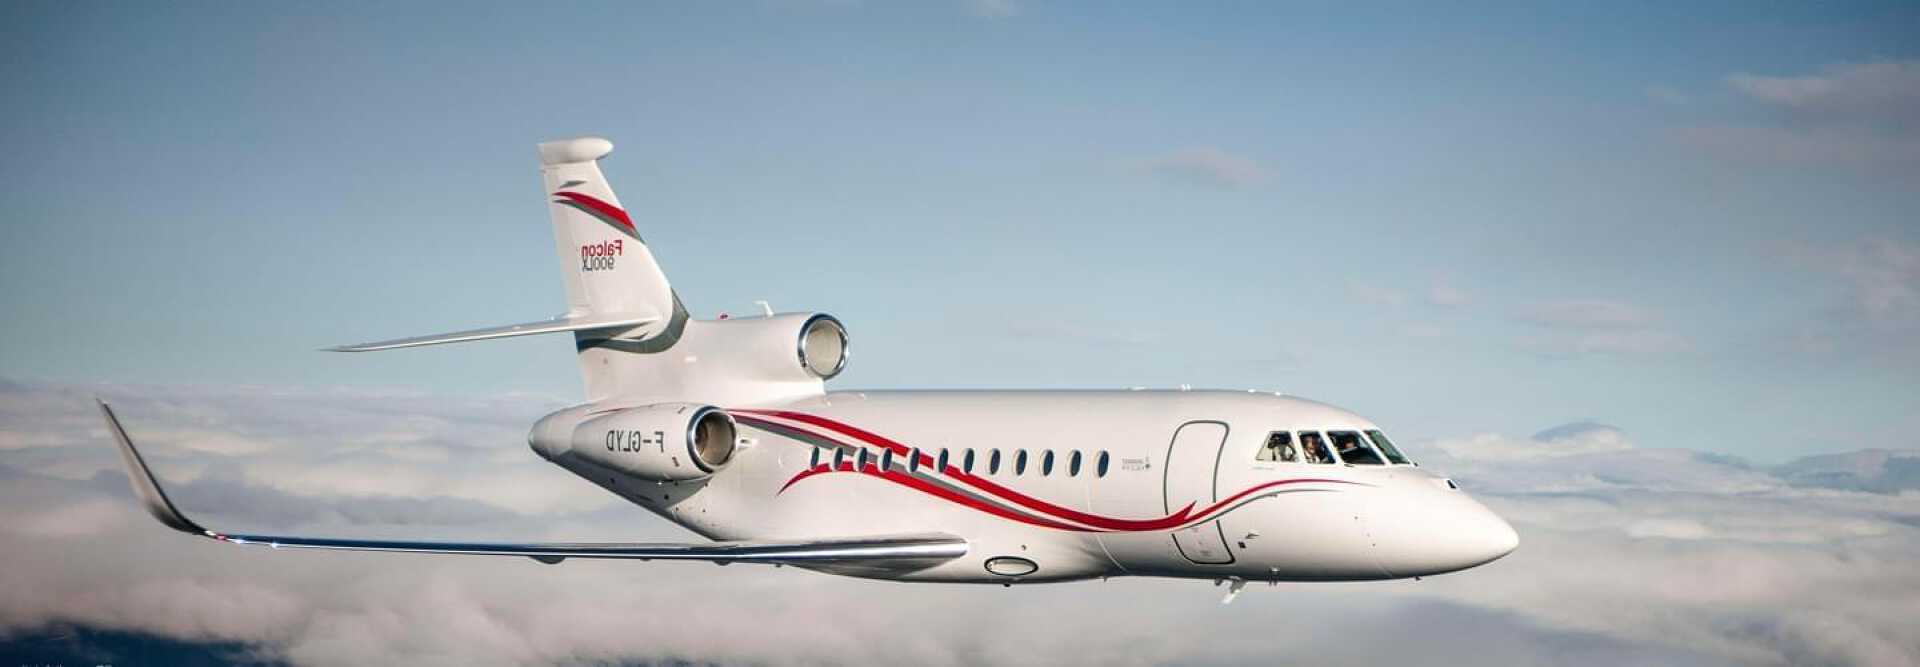 Super Large Business Jet Dassault Falcon 900LX to charter for private aviation flights with LunaJets for fuel efficiency, range, intercontinental